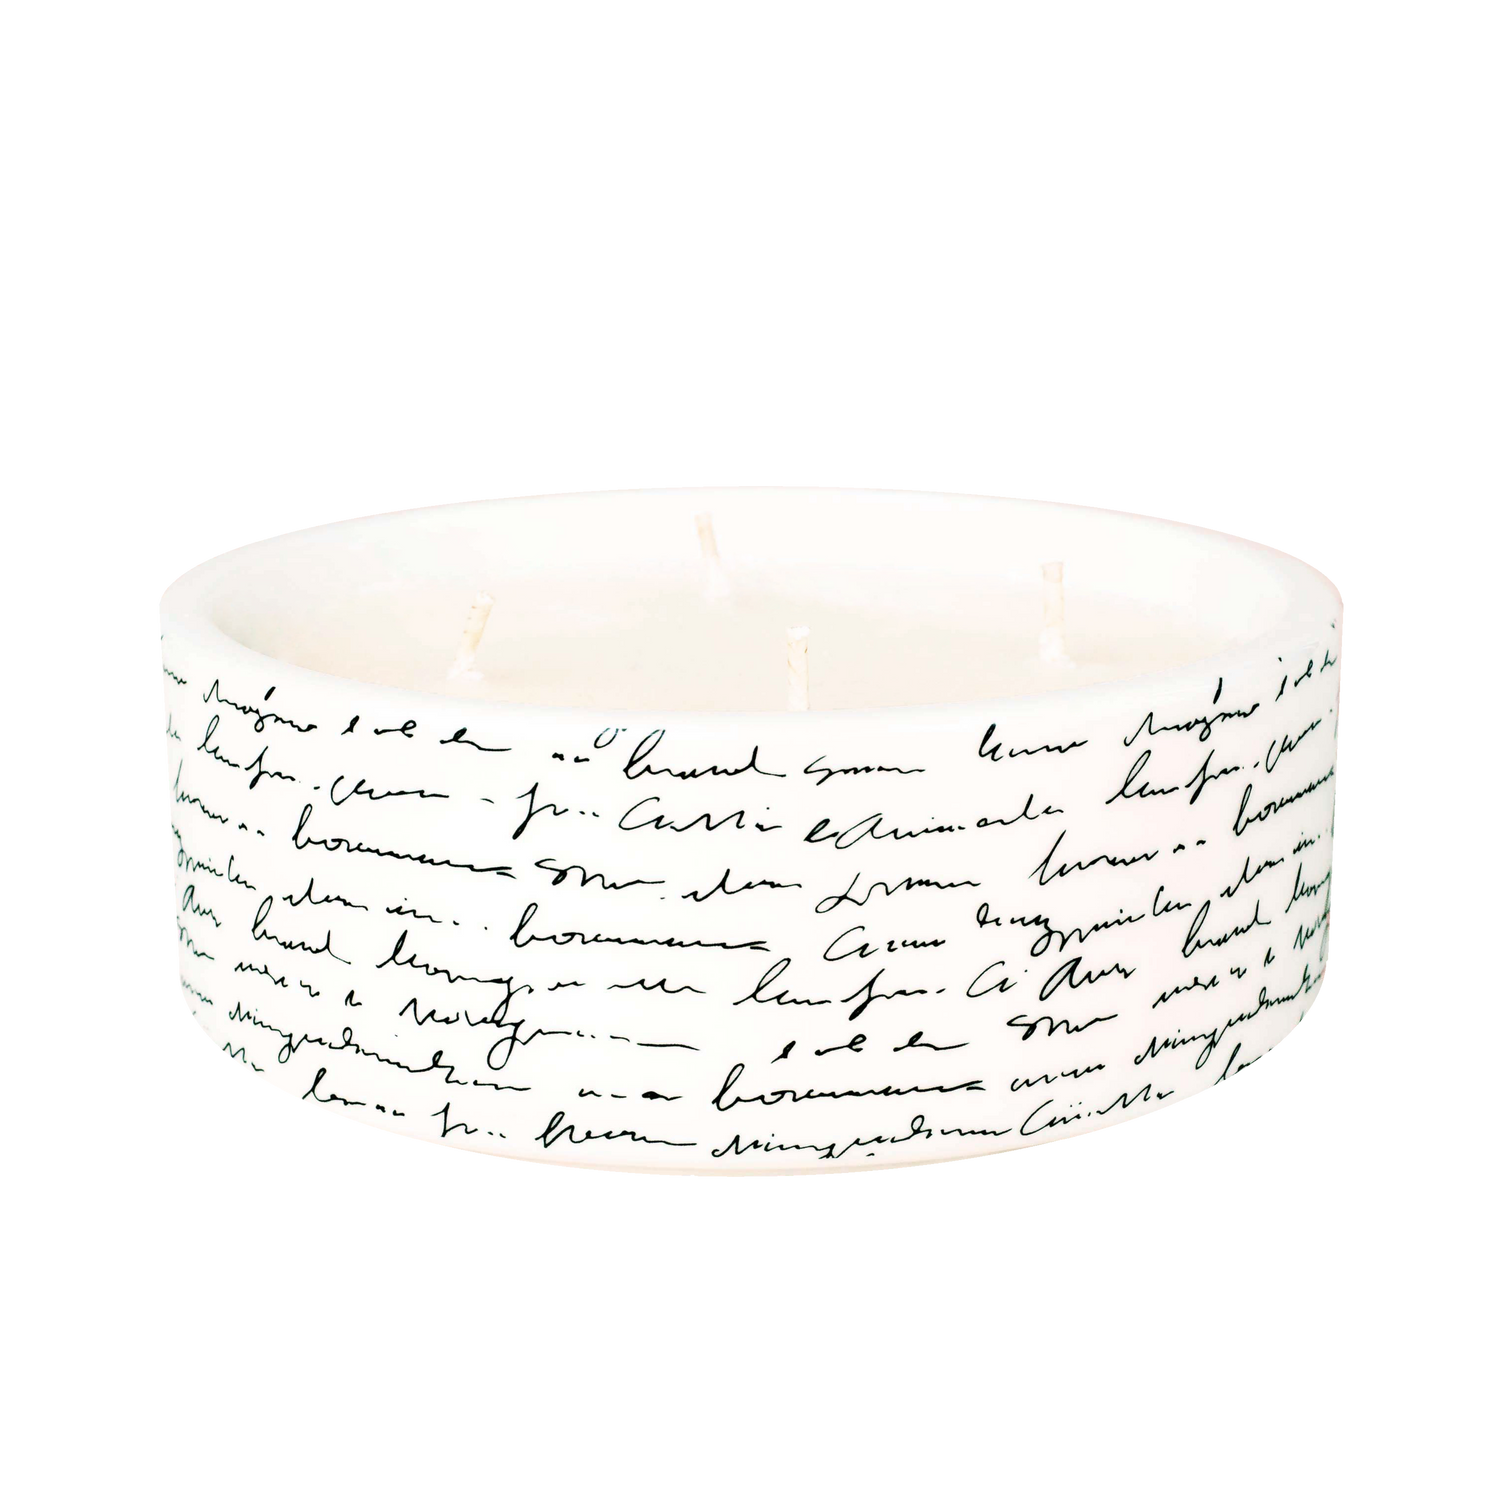 Scented Soy Wax Four Wick Candle on Ceramic Vessel with Black and White Scribble Design